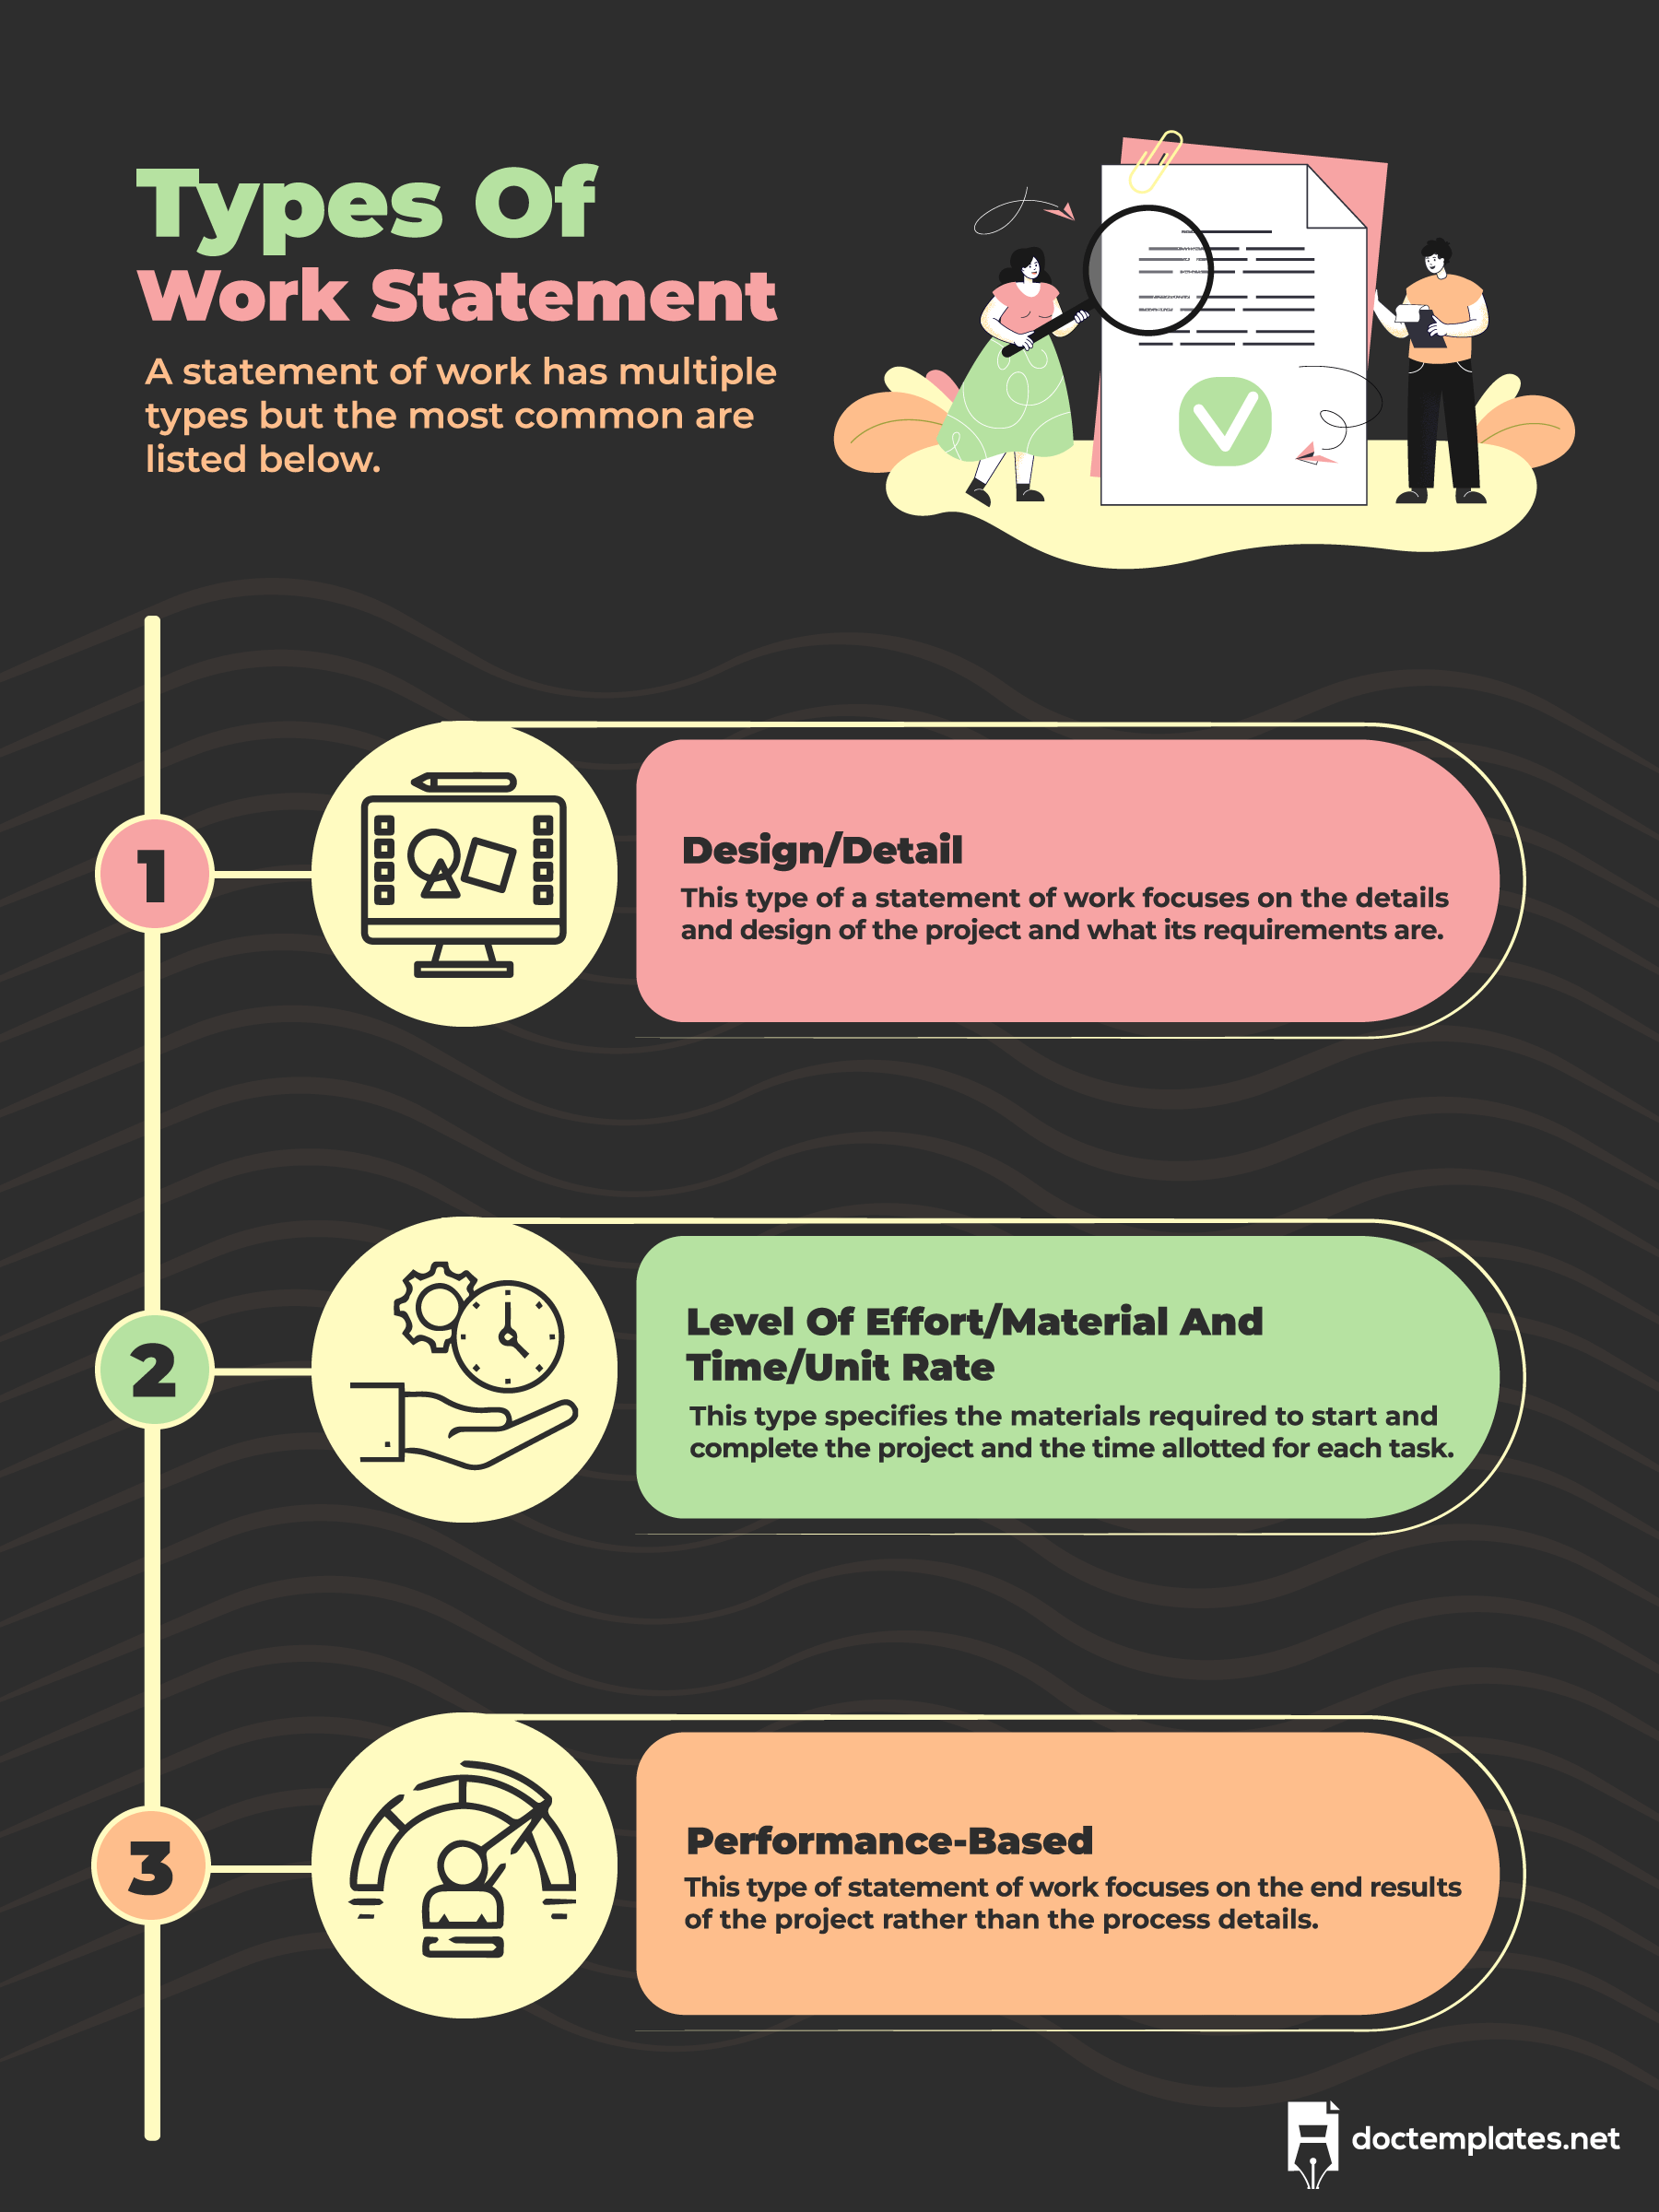 This infographic is about work statement types.